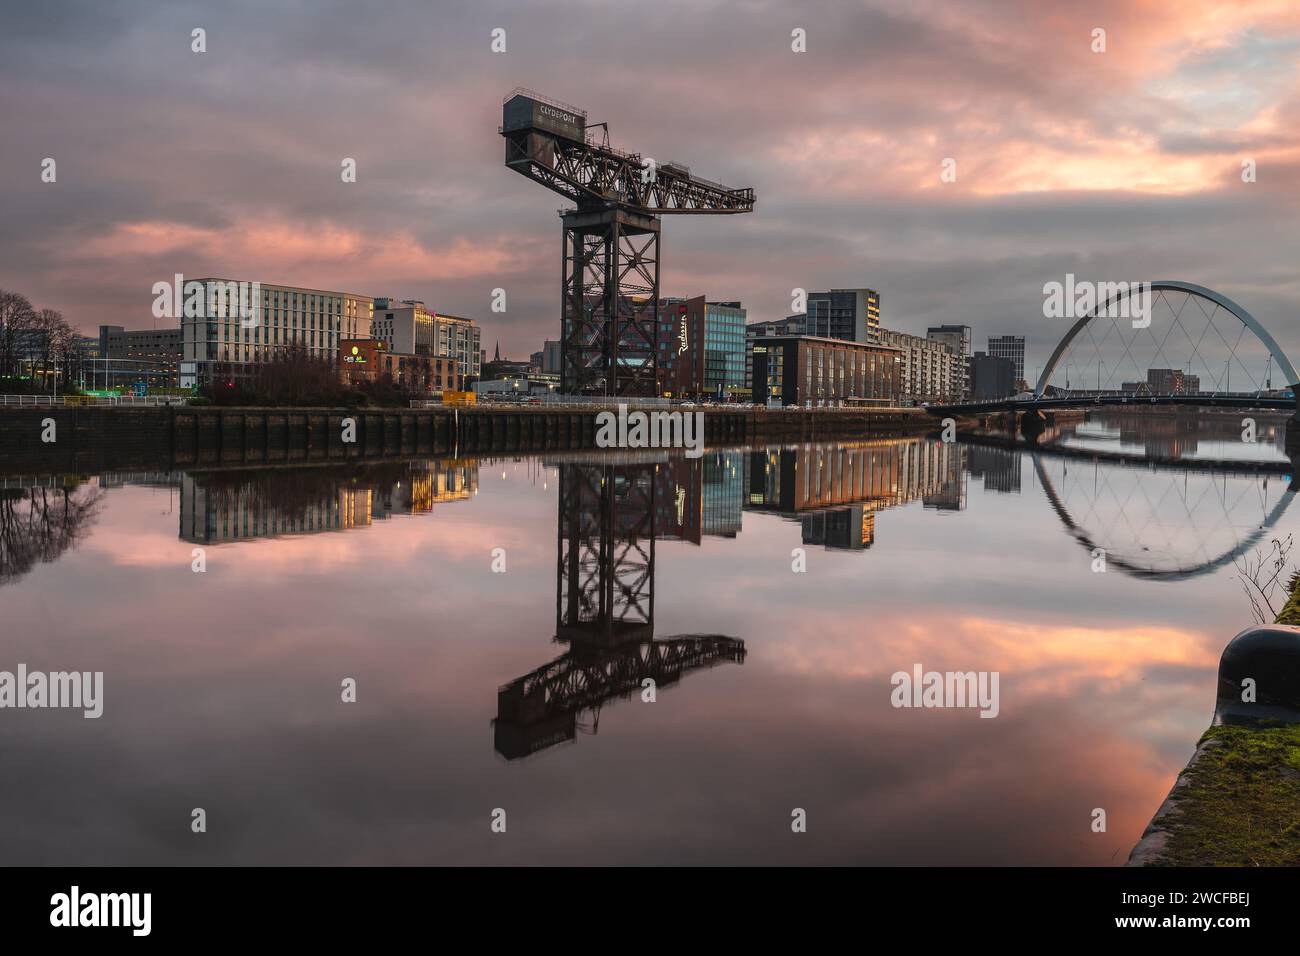 Glasgow with the Clyde Arch Bridge over the Clyde river, Scotland. Stock Photo